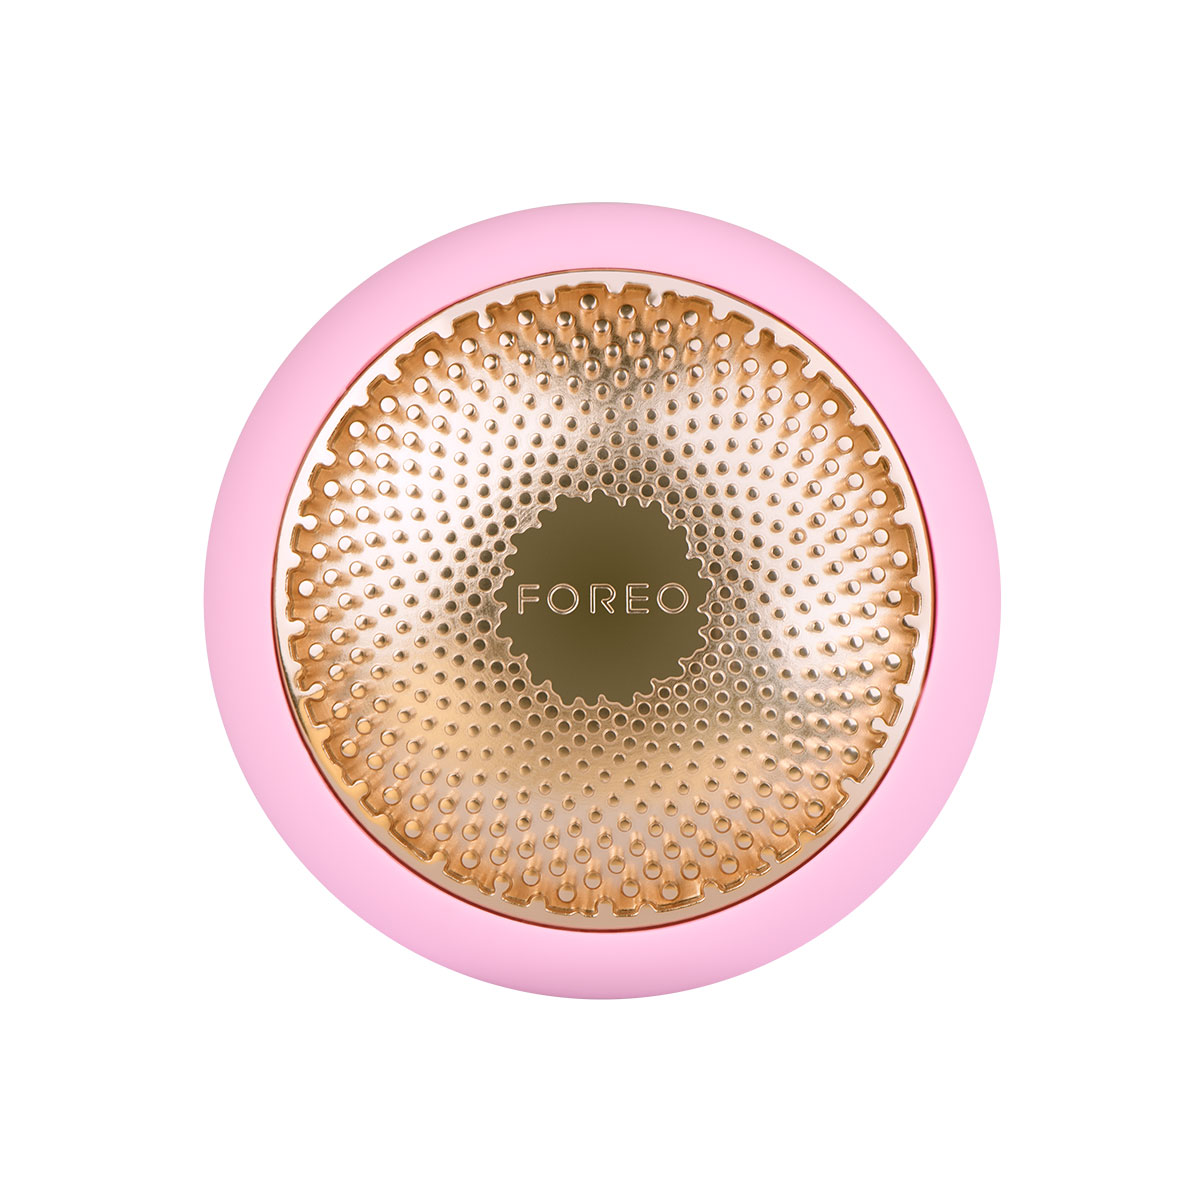 01_FOREO_UFO-2_FRONT_Pink_Transparent